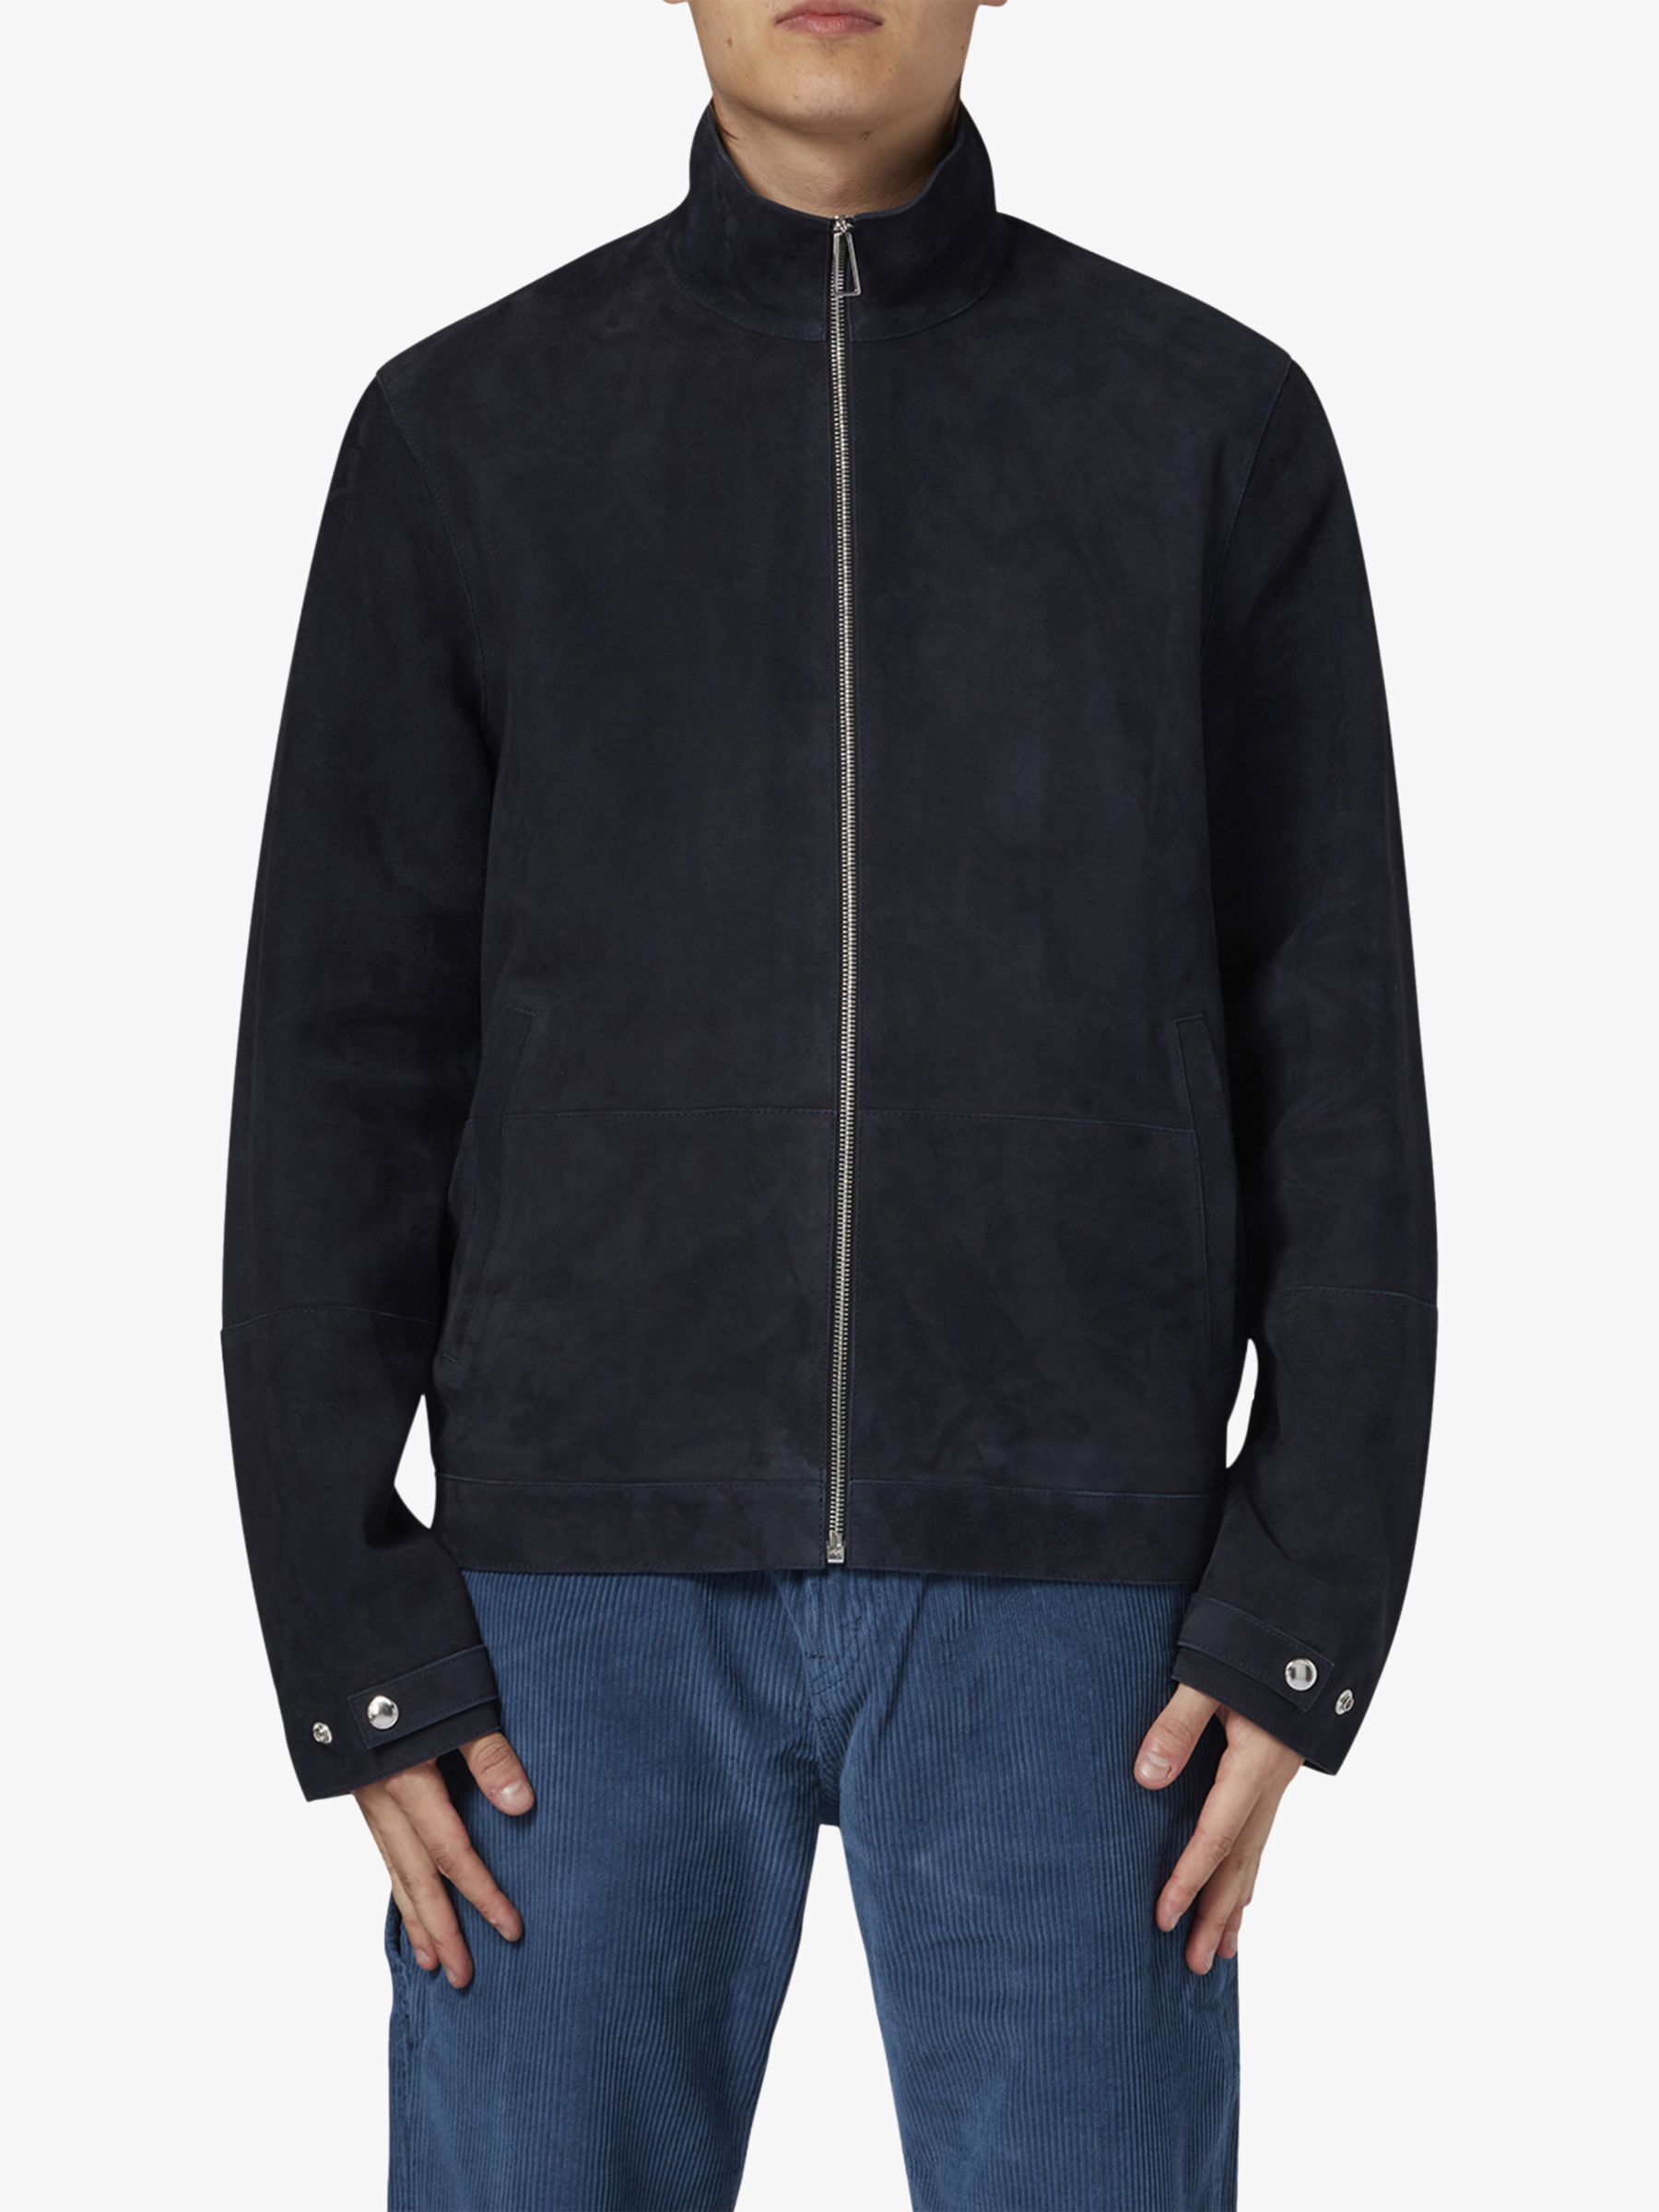 Paul Smith Suede Jacket, Navy, M